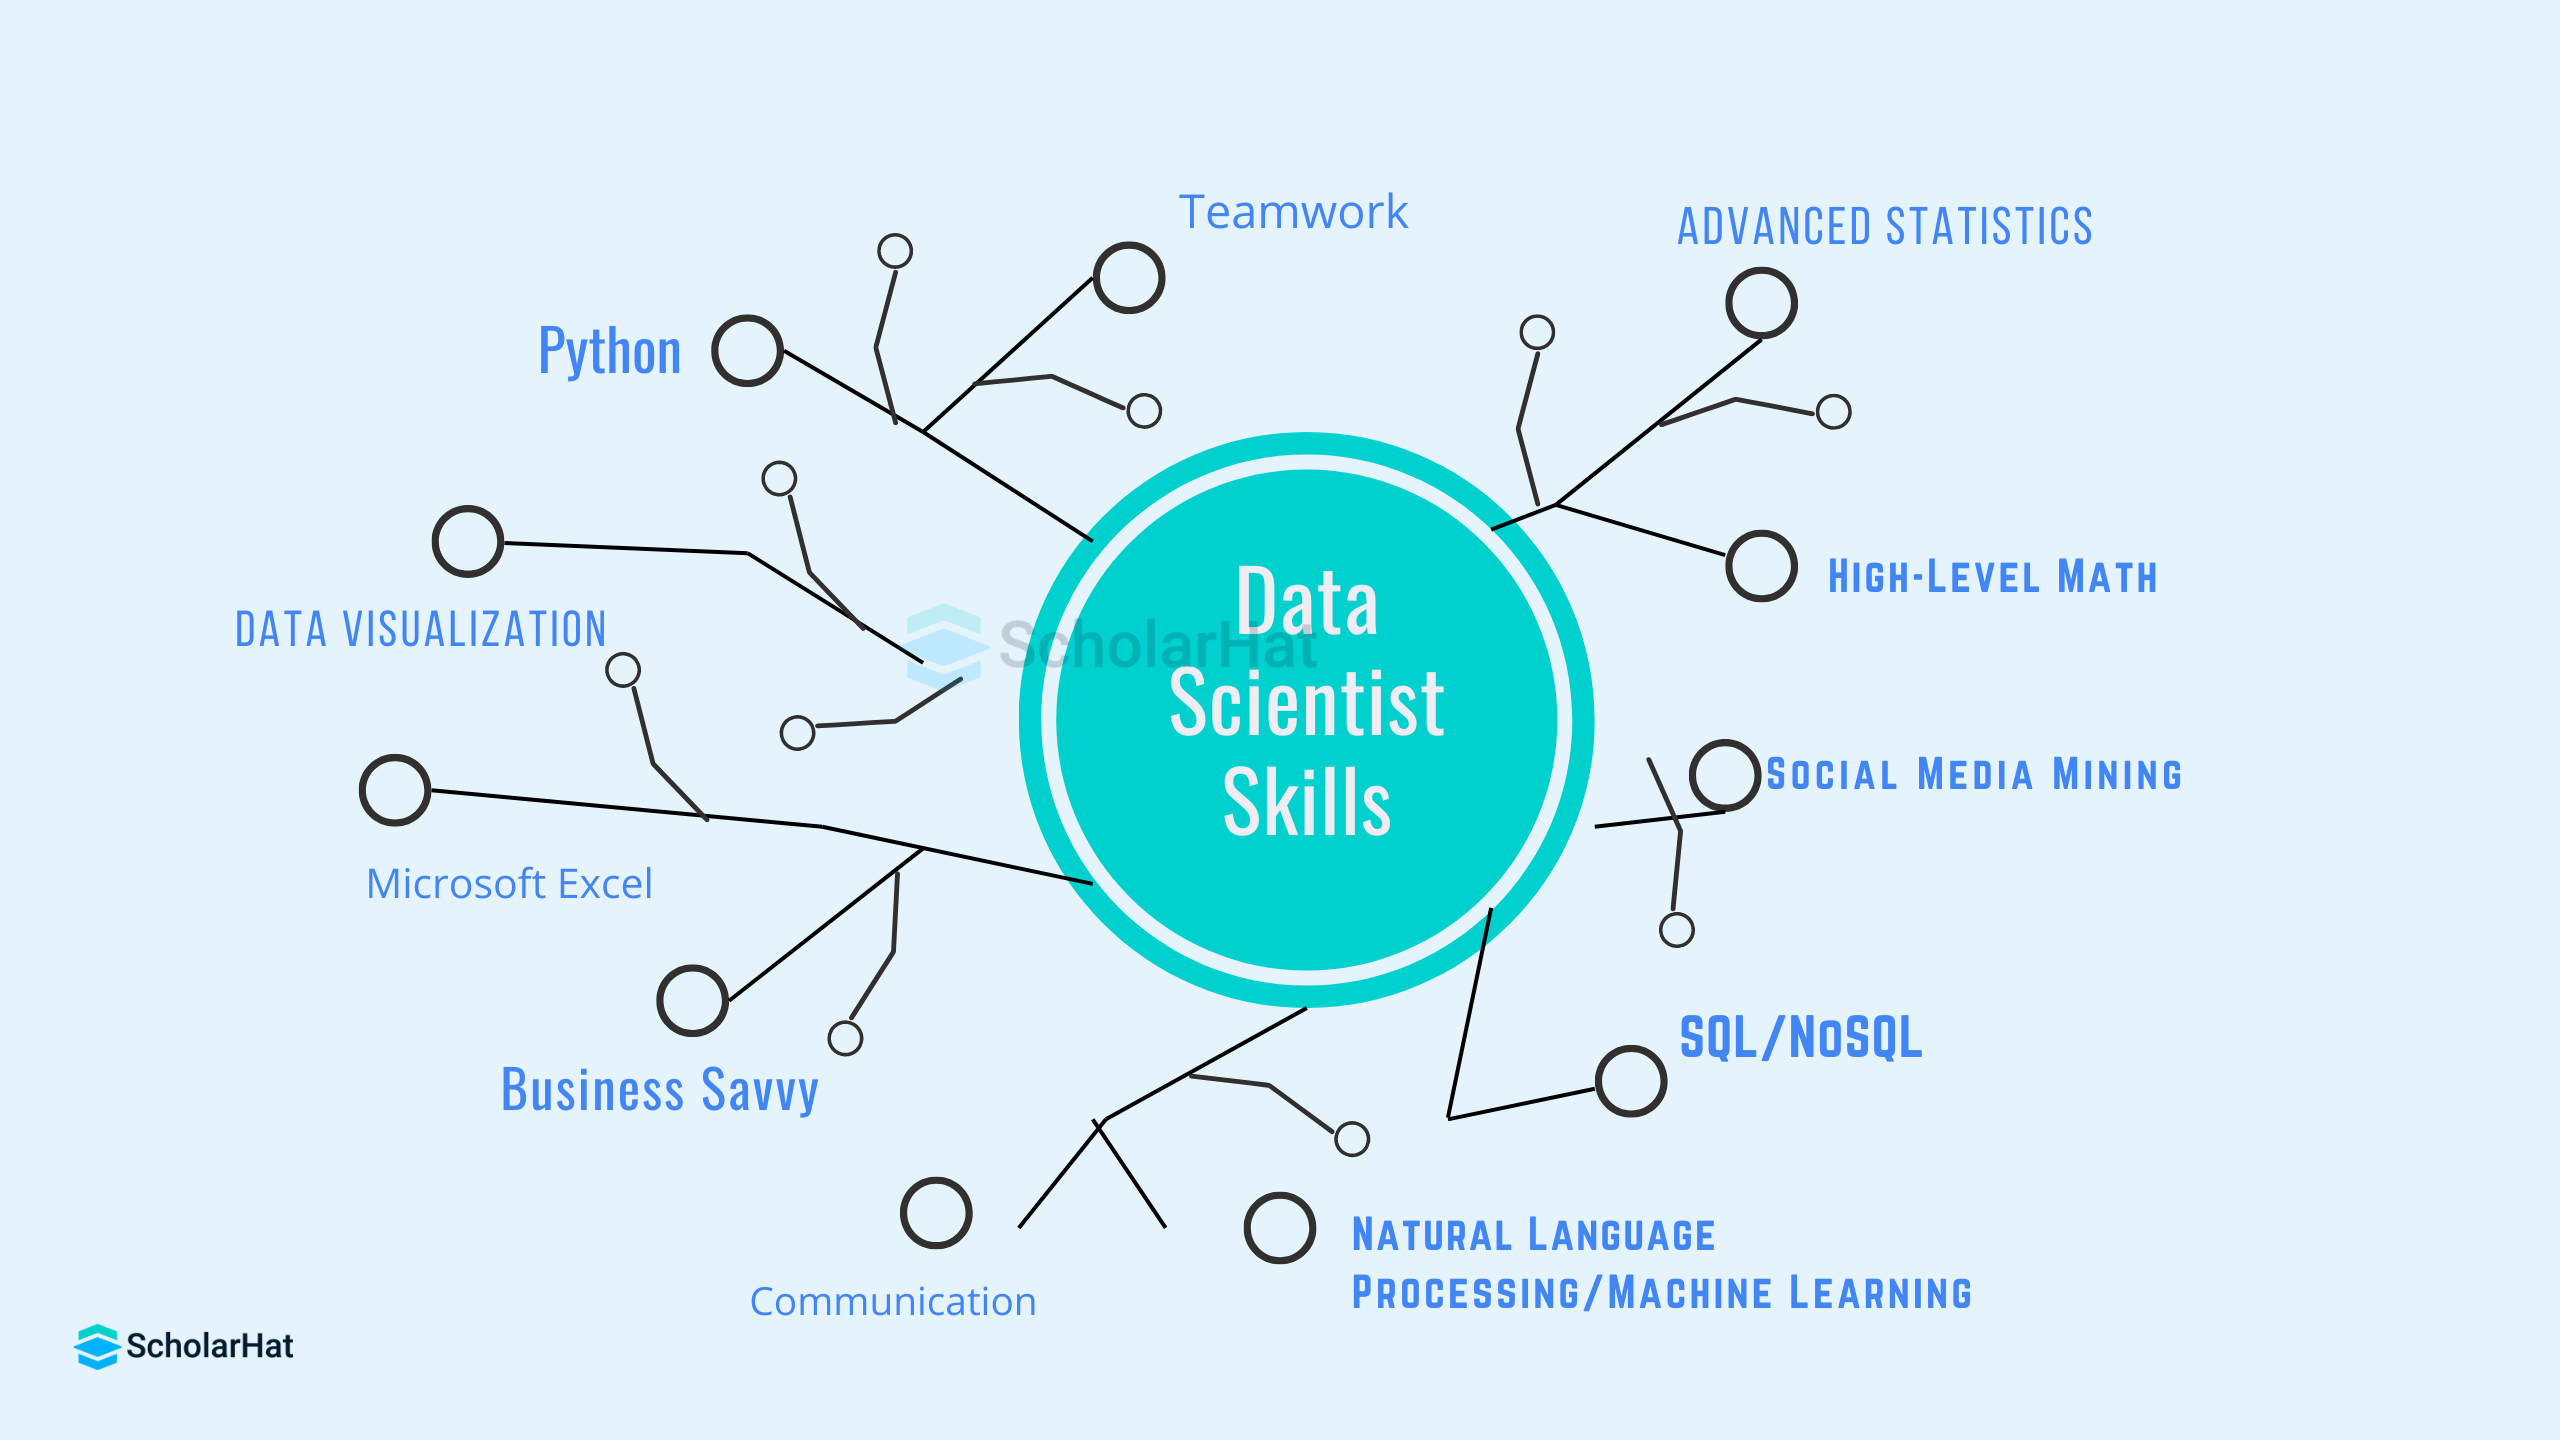 Skills Required for Data Scientists